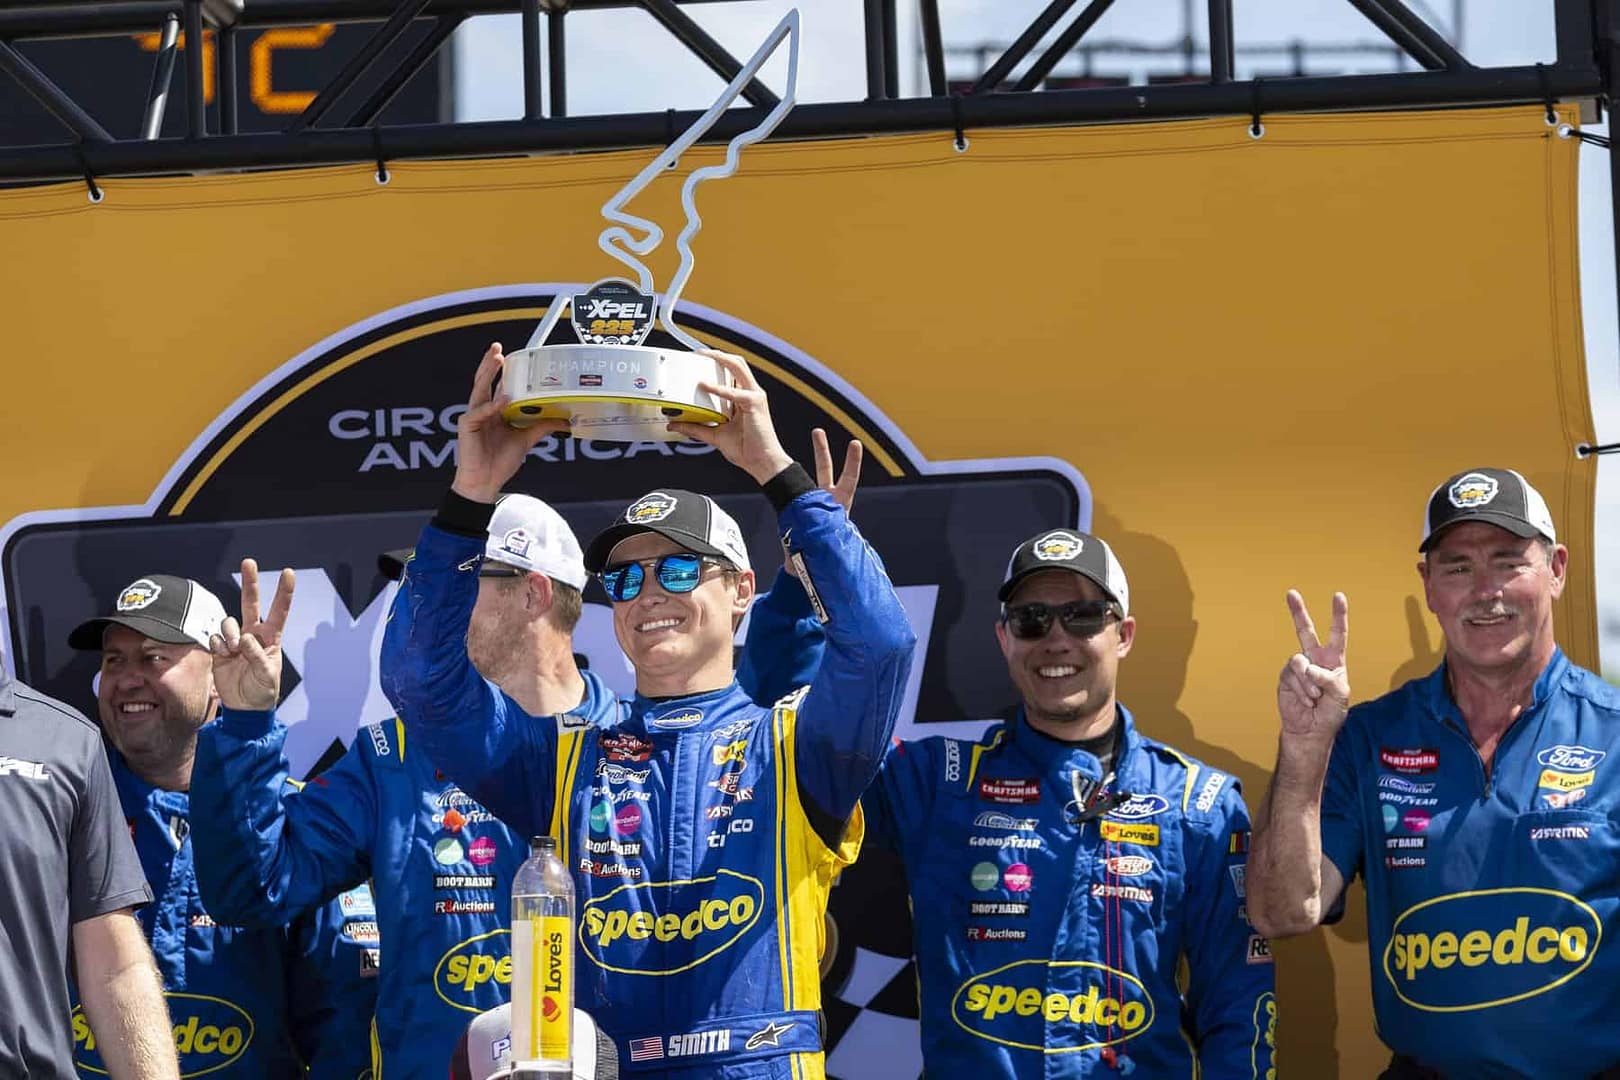 Our top NASCAR bets and predictions for Nashville's Truck Series Rackley Roofing 200, which includes a heavy dose of...